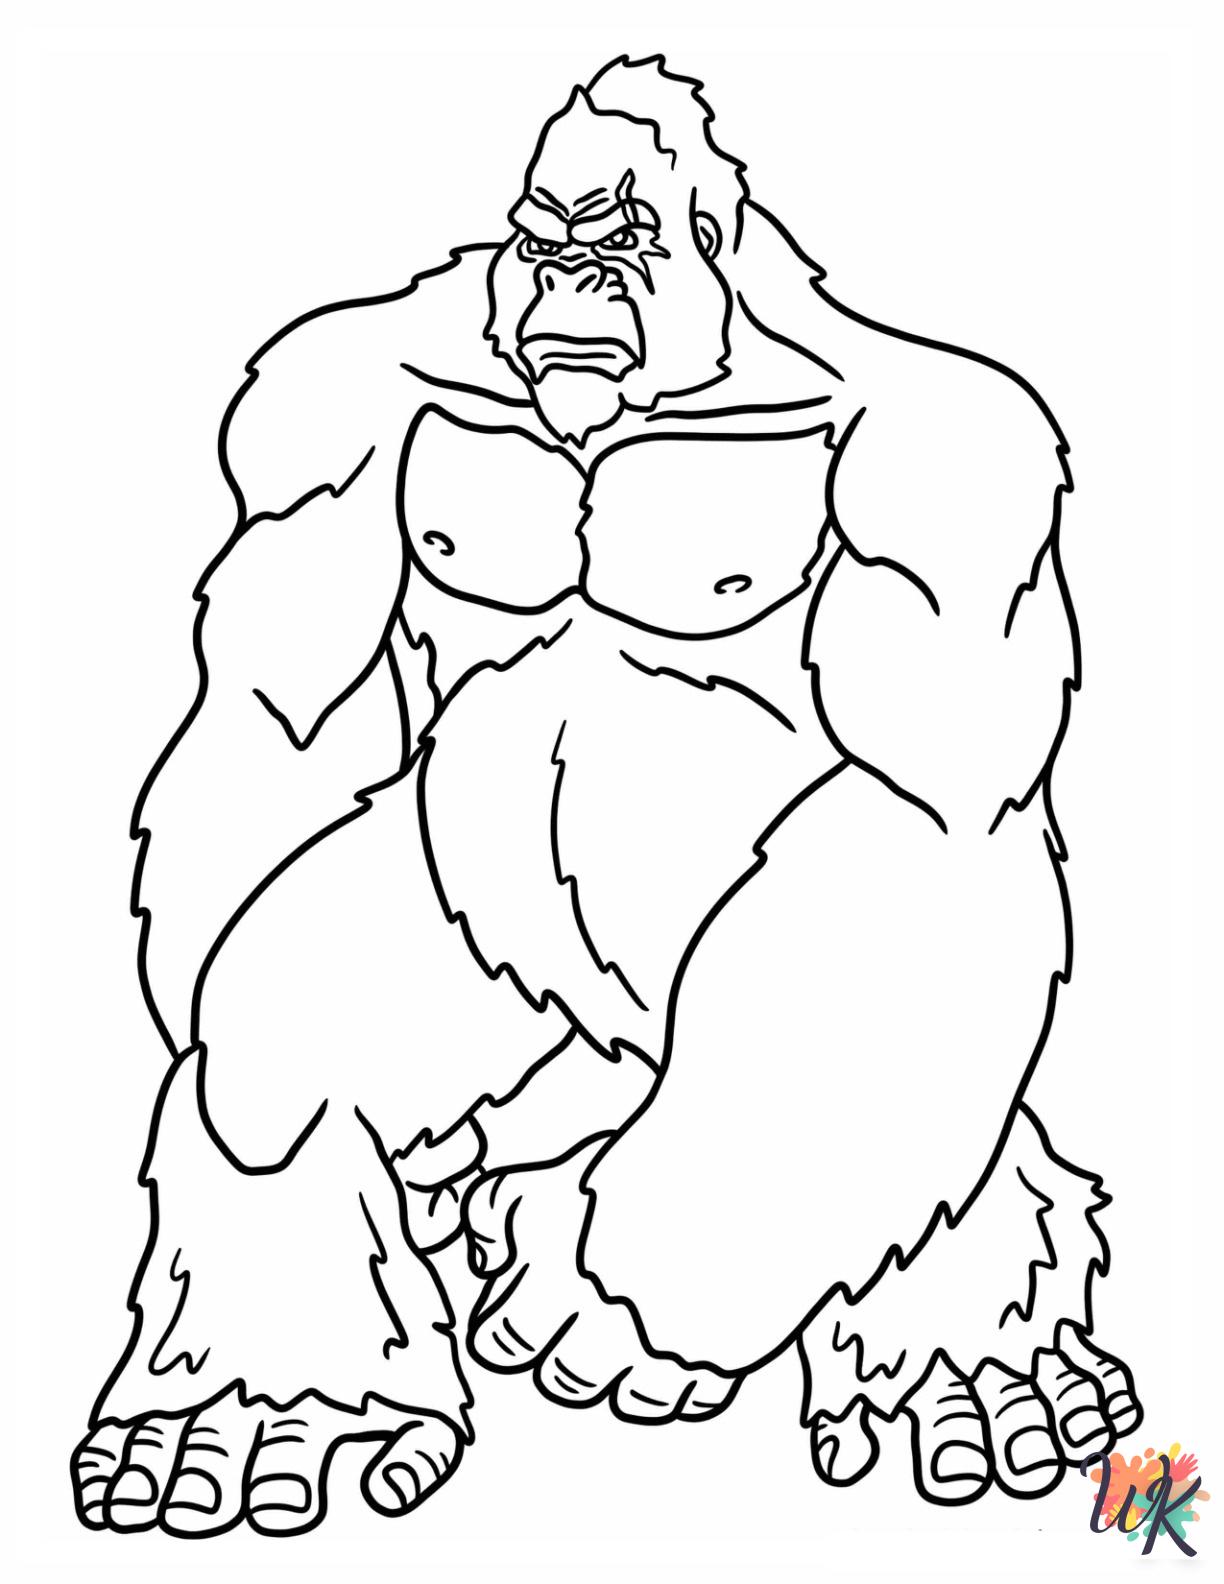 printable King Kong coloring pages for adults